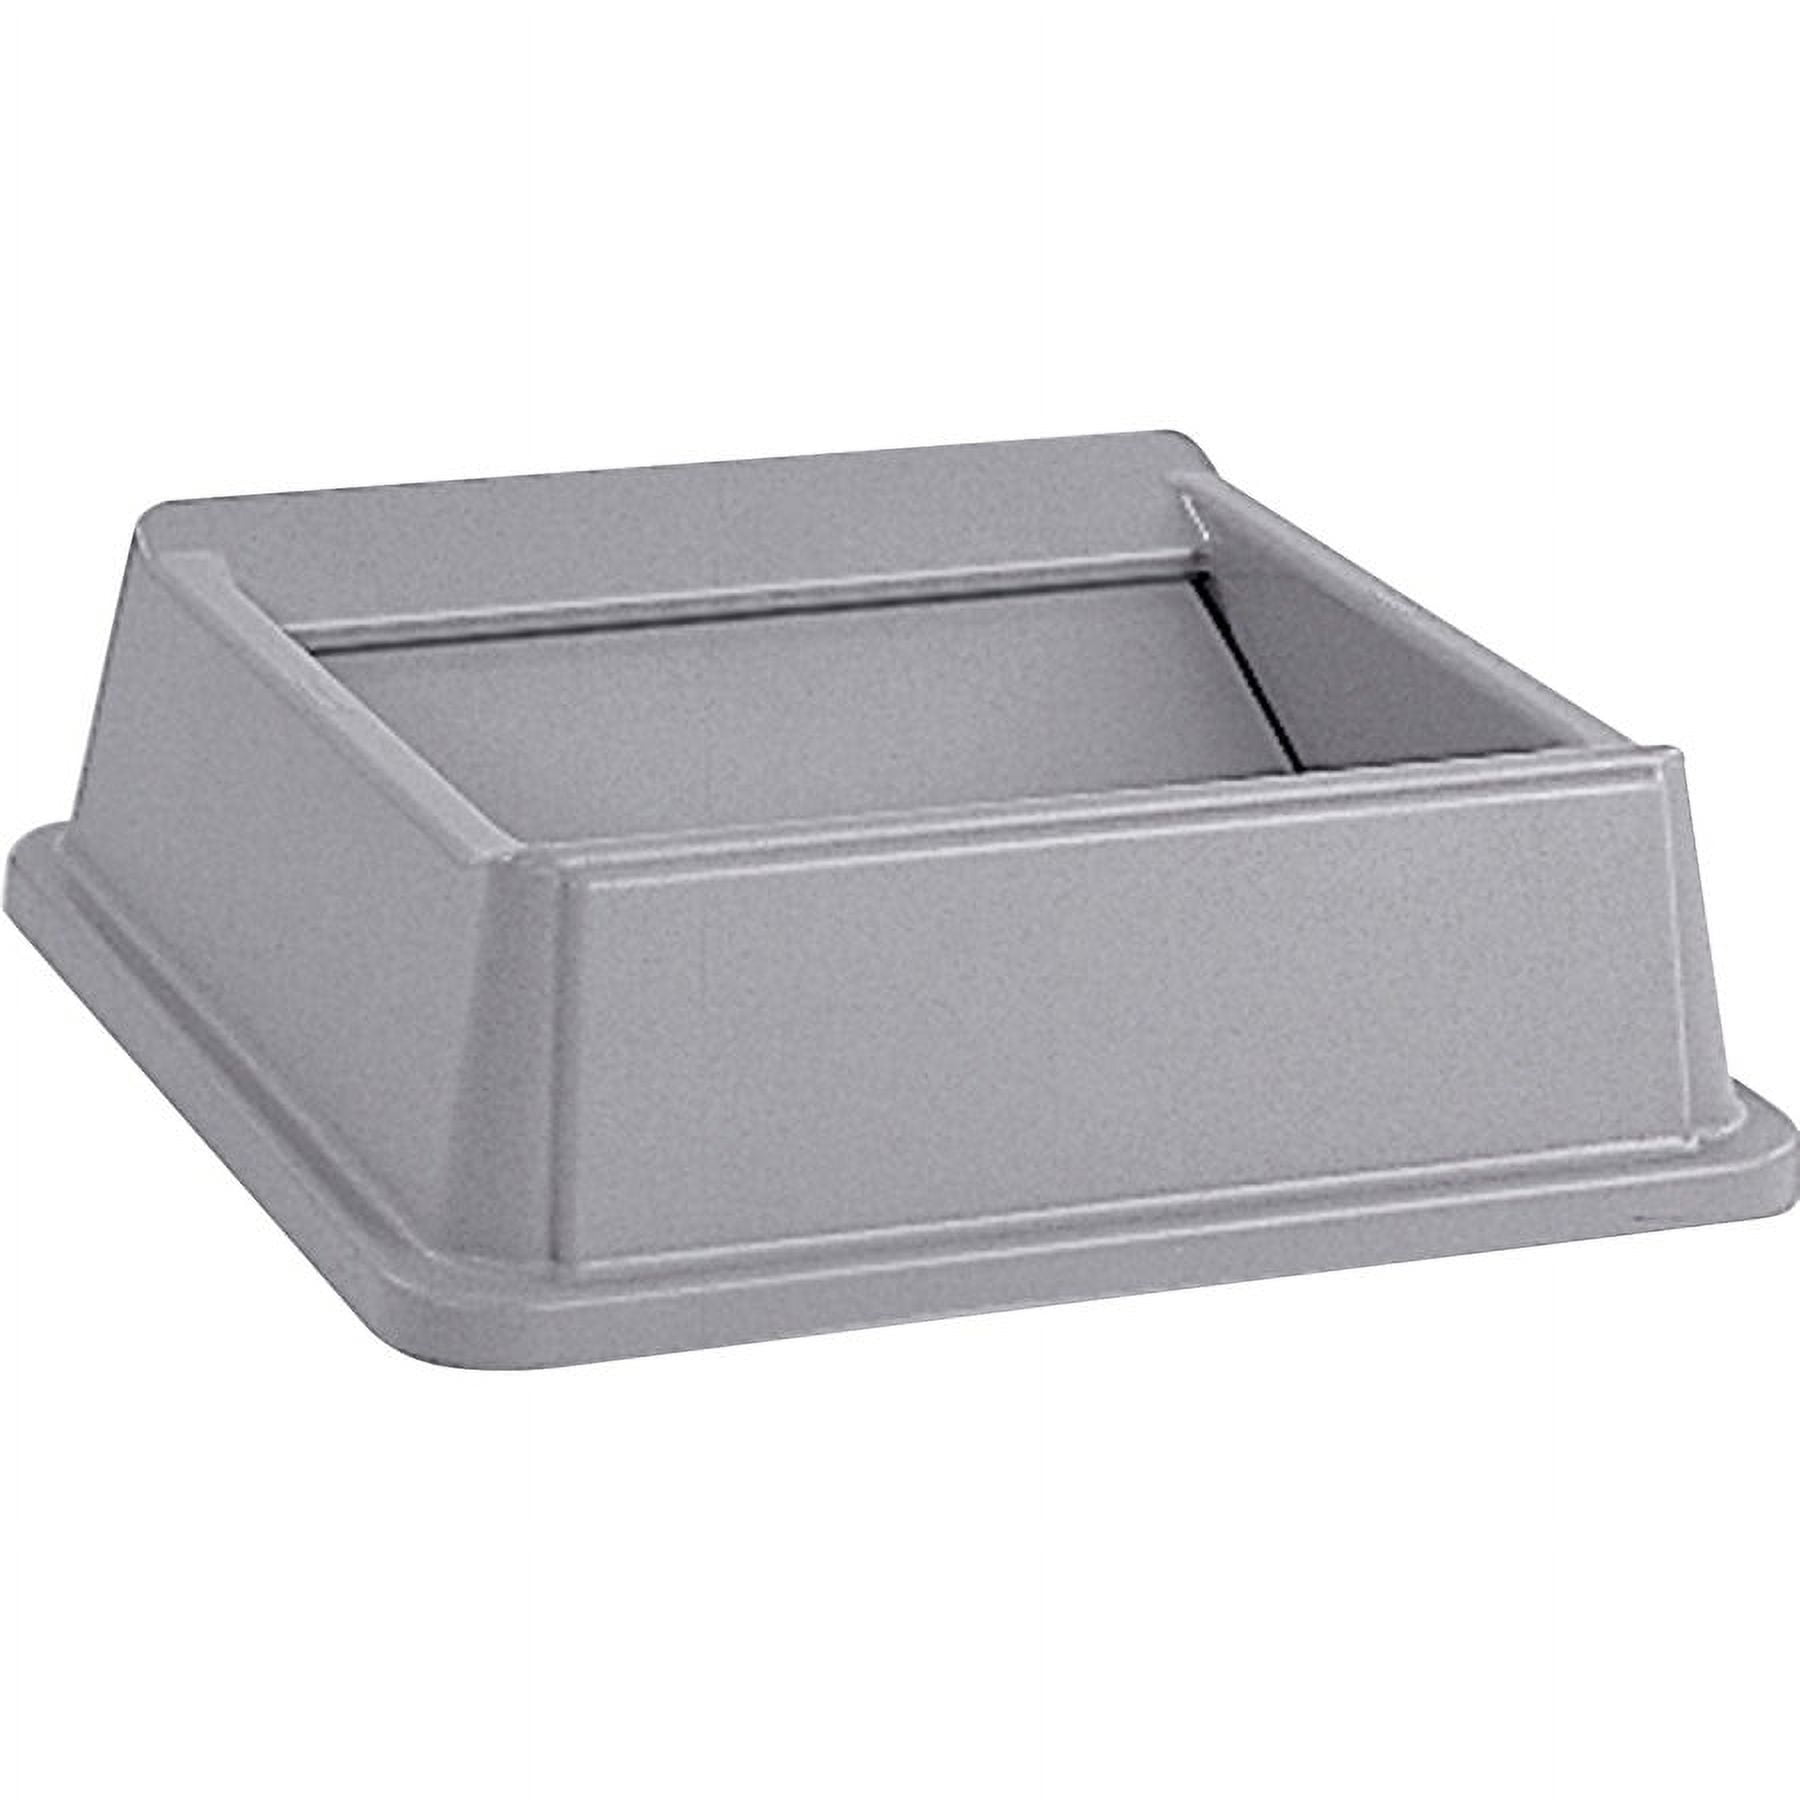 Rubbermaid Commercial Gray Untouchable Square Swing Top Lid